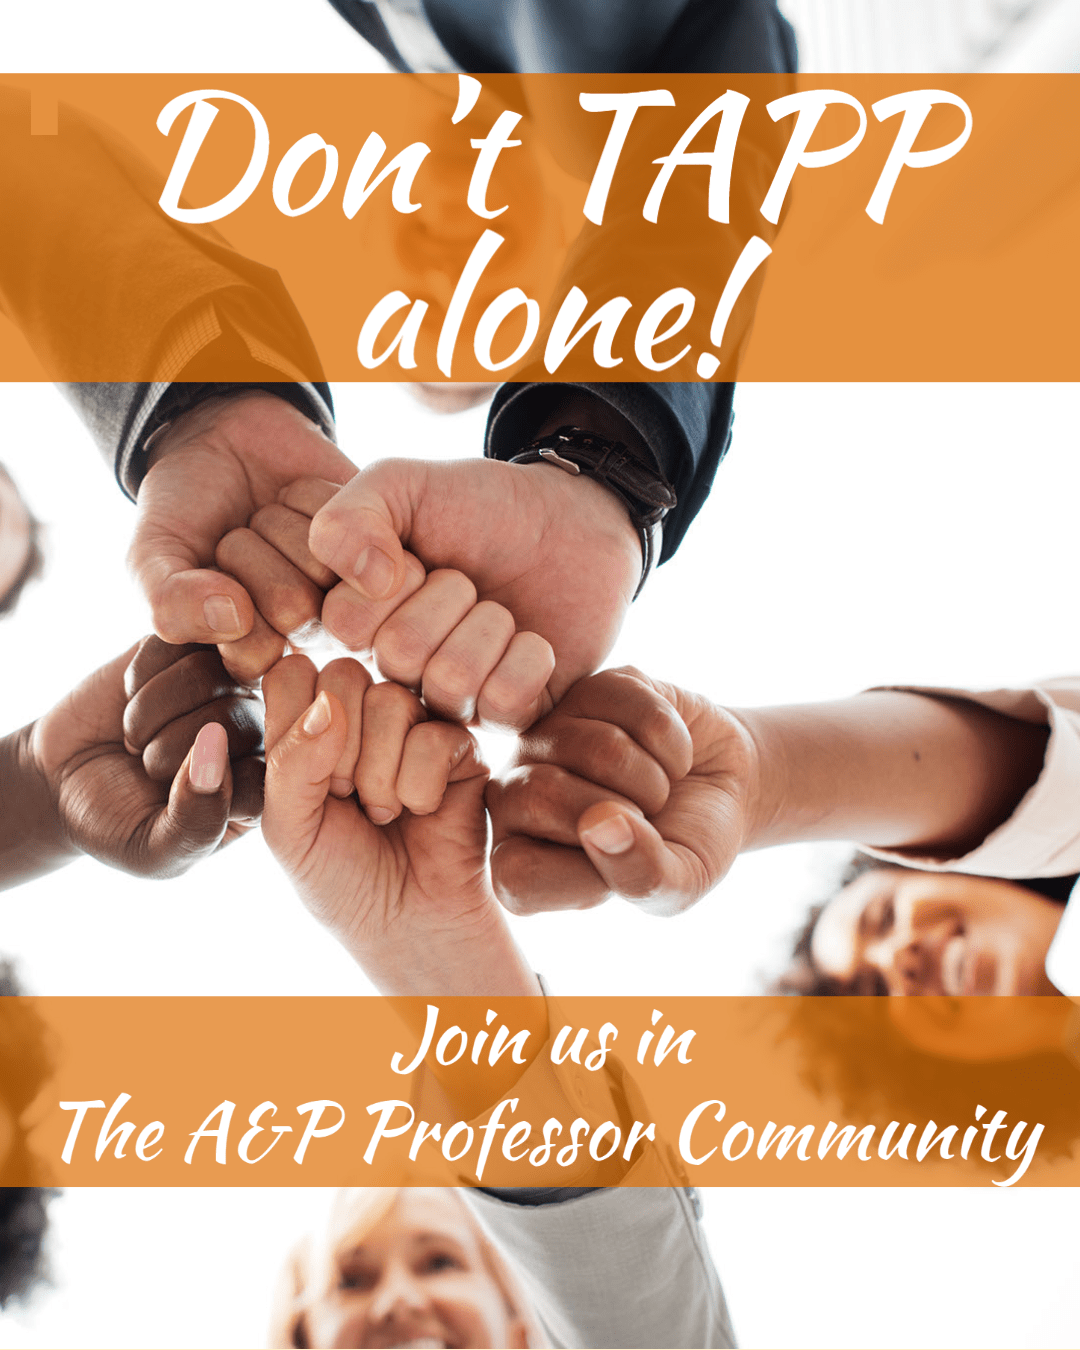 joined fists with title: Don't TAPP alone! Join us in The A&P Professor Community